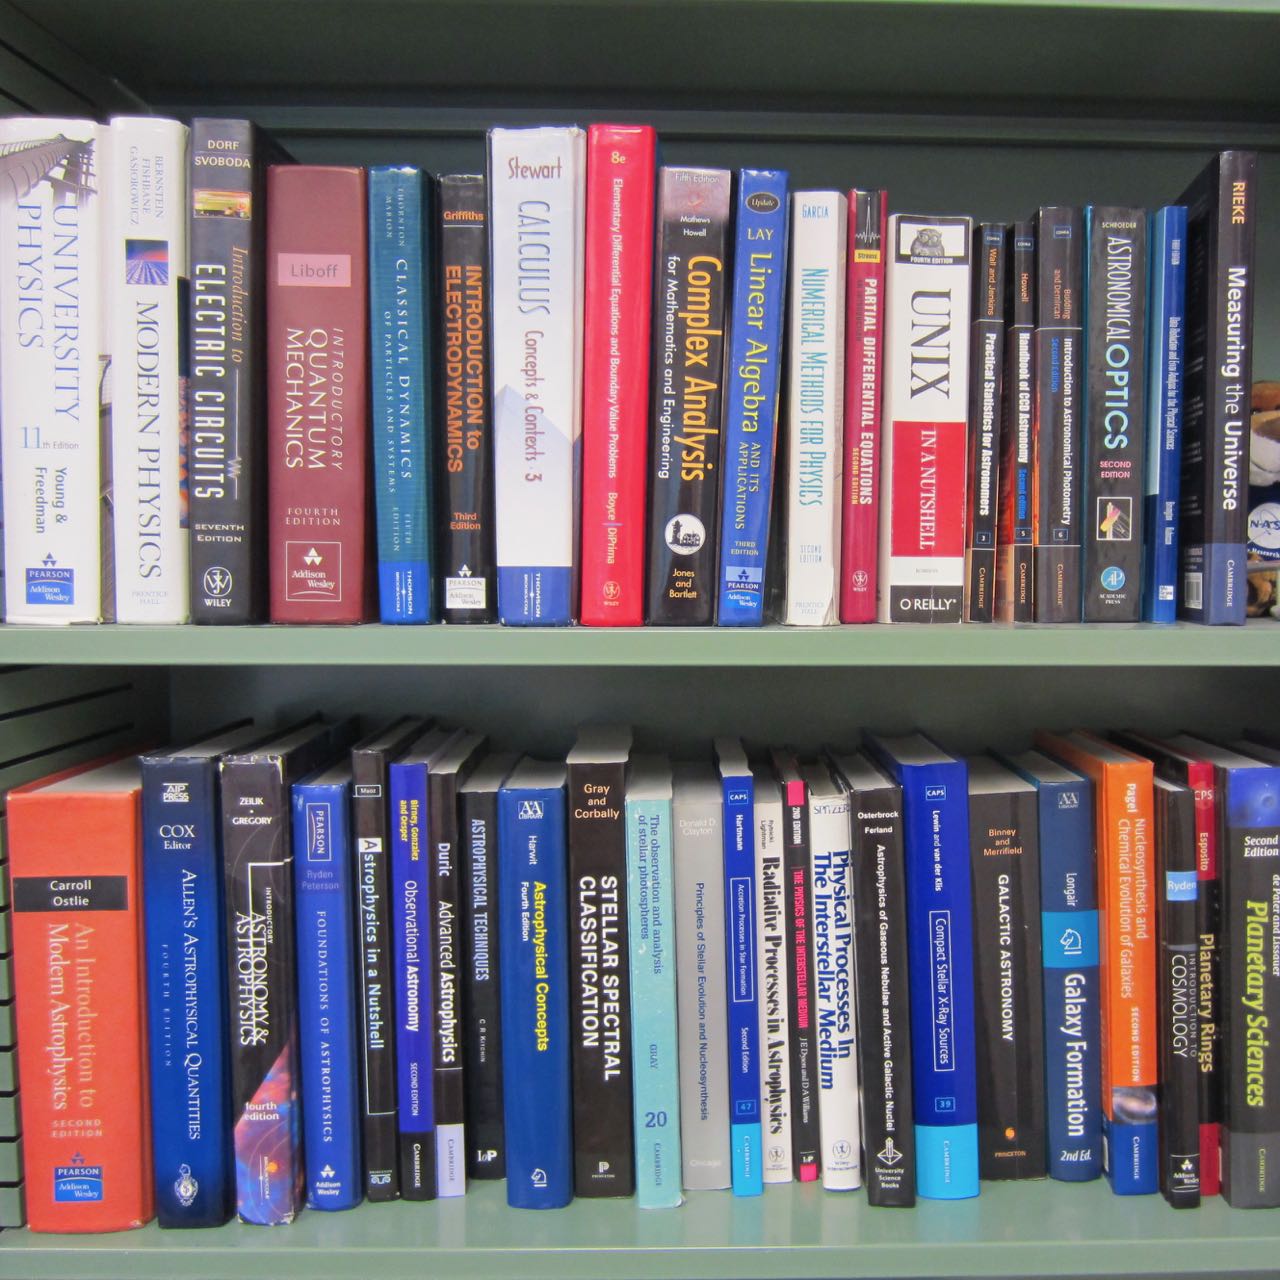 A bookshelf with many textbooks for physics, math, and astronomy.